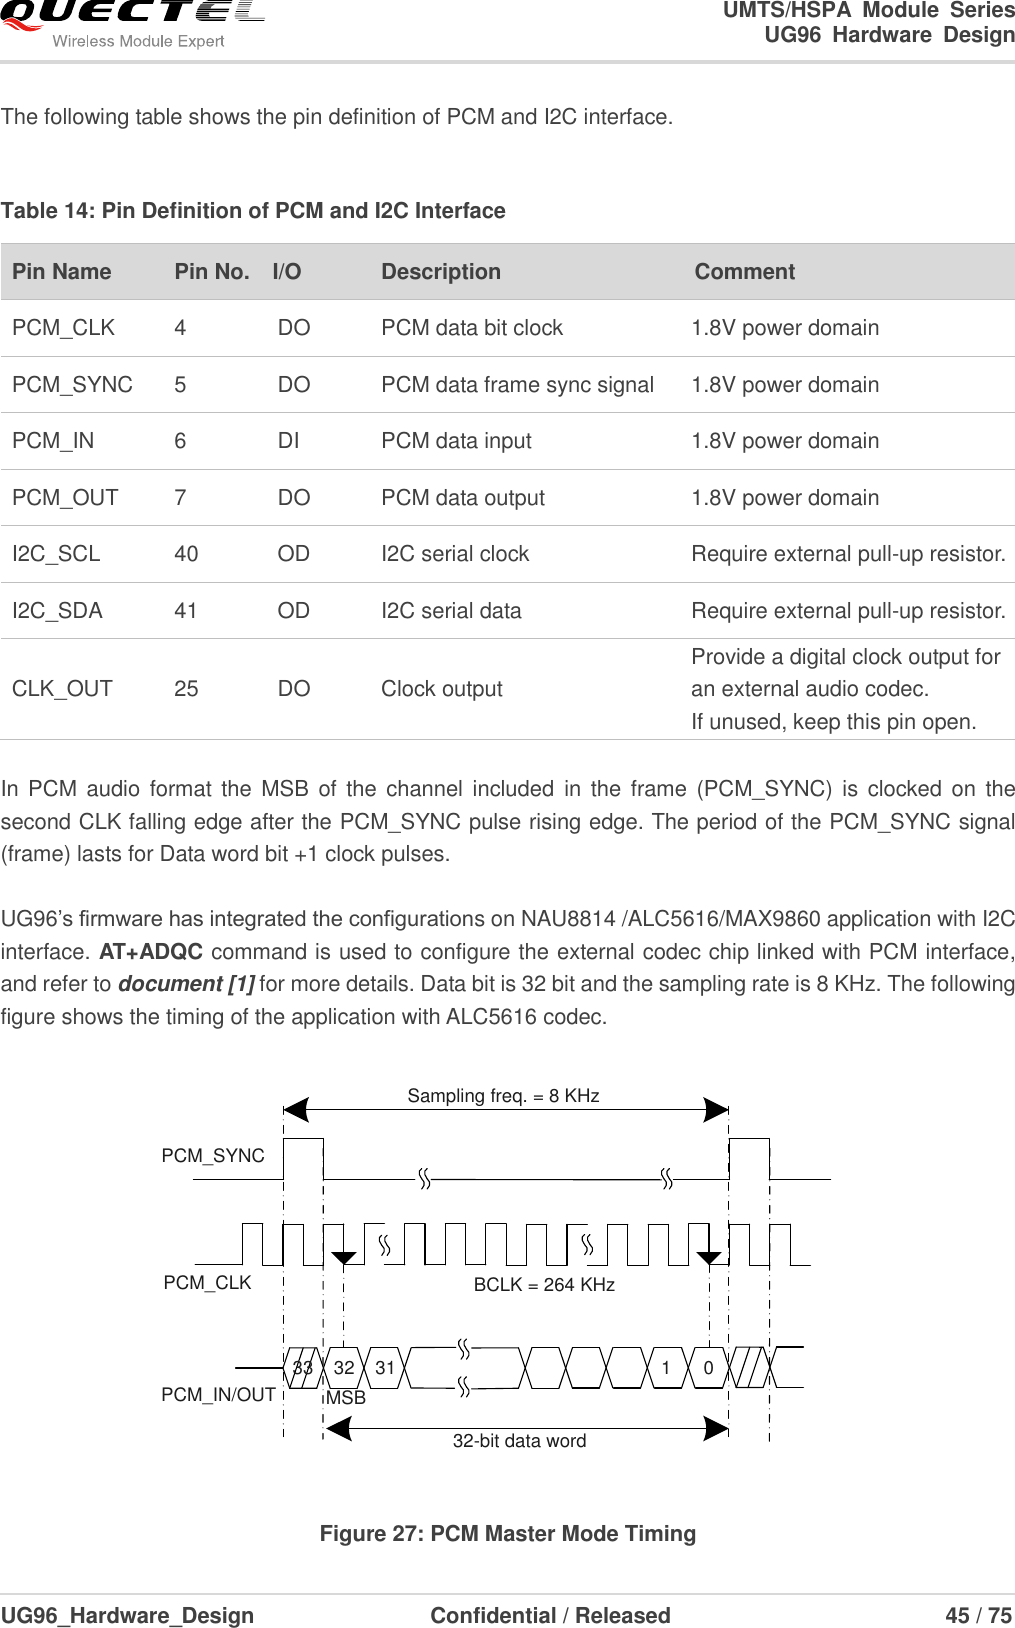                                                                        UMTS/HSPA  Module  Series                                                                 UG96  Hardware  Design  UG96_Hardware_Design                  Confidential / Released                             45 / 75    The following table shows the pin definition of PCM and I2C interface.  Table 14: Pin Definition of PCM and I2C Interface Pin Name   Pin No.    I/O Description Comment PCM_CLK 4 DO PCM data bit clock 1.8V power domain PCM_SYNC 5 DO PCM data frame sync signal 1.8V power domain PCM_IN 6 DI PCM data input 1.8V power domain PCM_OUT 7 DO PCM data output 1.8V power domain I2C_SCL 40 OD I2C serial clock Require external pull-up resistor. I2C_SDA 41 OD I2C serial data Require external pull-up resistor. CLK_OUT 25 DO Clock output Provide a digital clock output for an external audio codec.   If unused, keep this pin open.  In PCM audio format the MSB  of  the channel  included  in the  frame (PCM_SYNC) is  clocked on  the second CLK falling edge after the PCM_SYNC pulse rising edge. The period of the PCM_SYNC signal (frame) lasts for Data word bit +1 clock pulses.    UG96’s firmware has integrated the configurations on NAU8814 /ALC5616/MAX9860 application with I2C interface. AT+ADQC command is used to configure the external codec chip linked with PCM interface, and refer to document [1] for more details. Data bit is 32 bit and the sampling rate is 8 KHz. The following figure shows the timing of the application with ALC5616 codec. PCM_CLKPCM_SYNCPCM_IN/OUT32 1 031Sampling freq. = 8 KHz32-bit data wordBCLK = 264 KHz33MSB Figure 27: PCM Master Mode Timing 